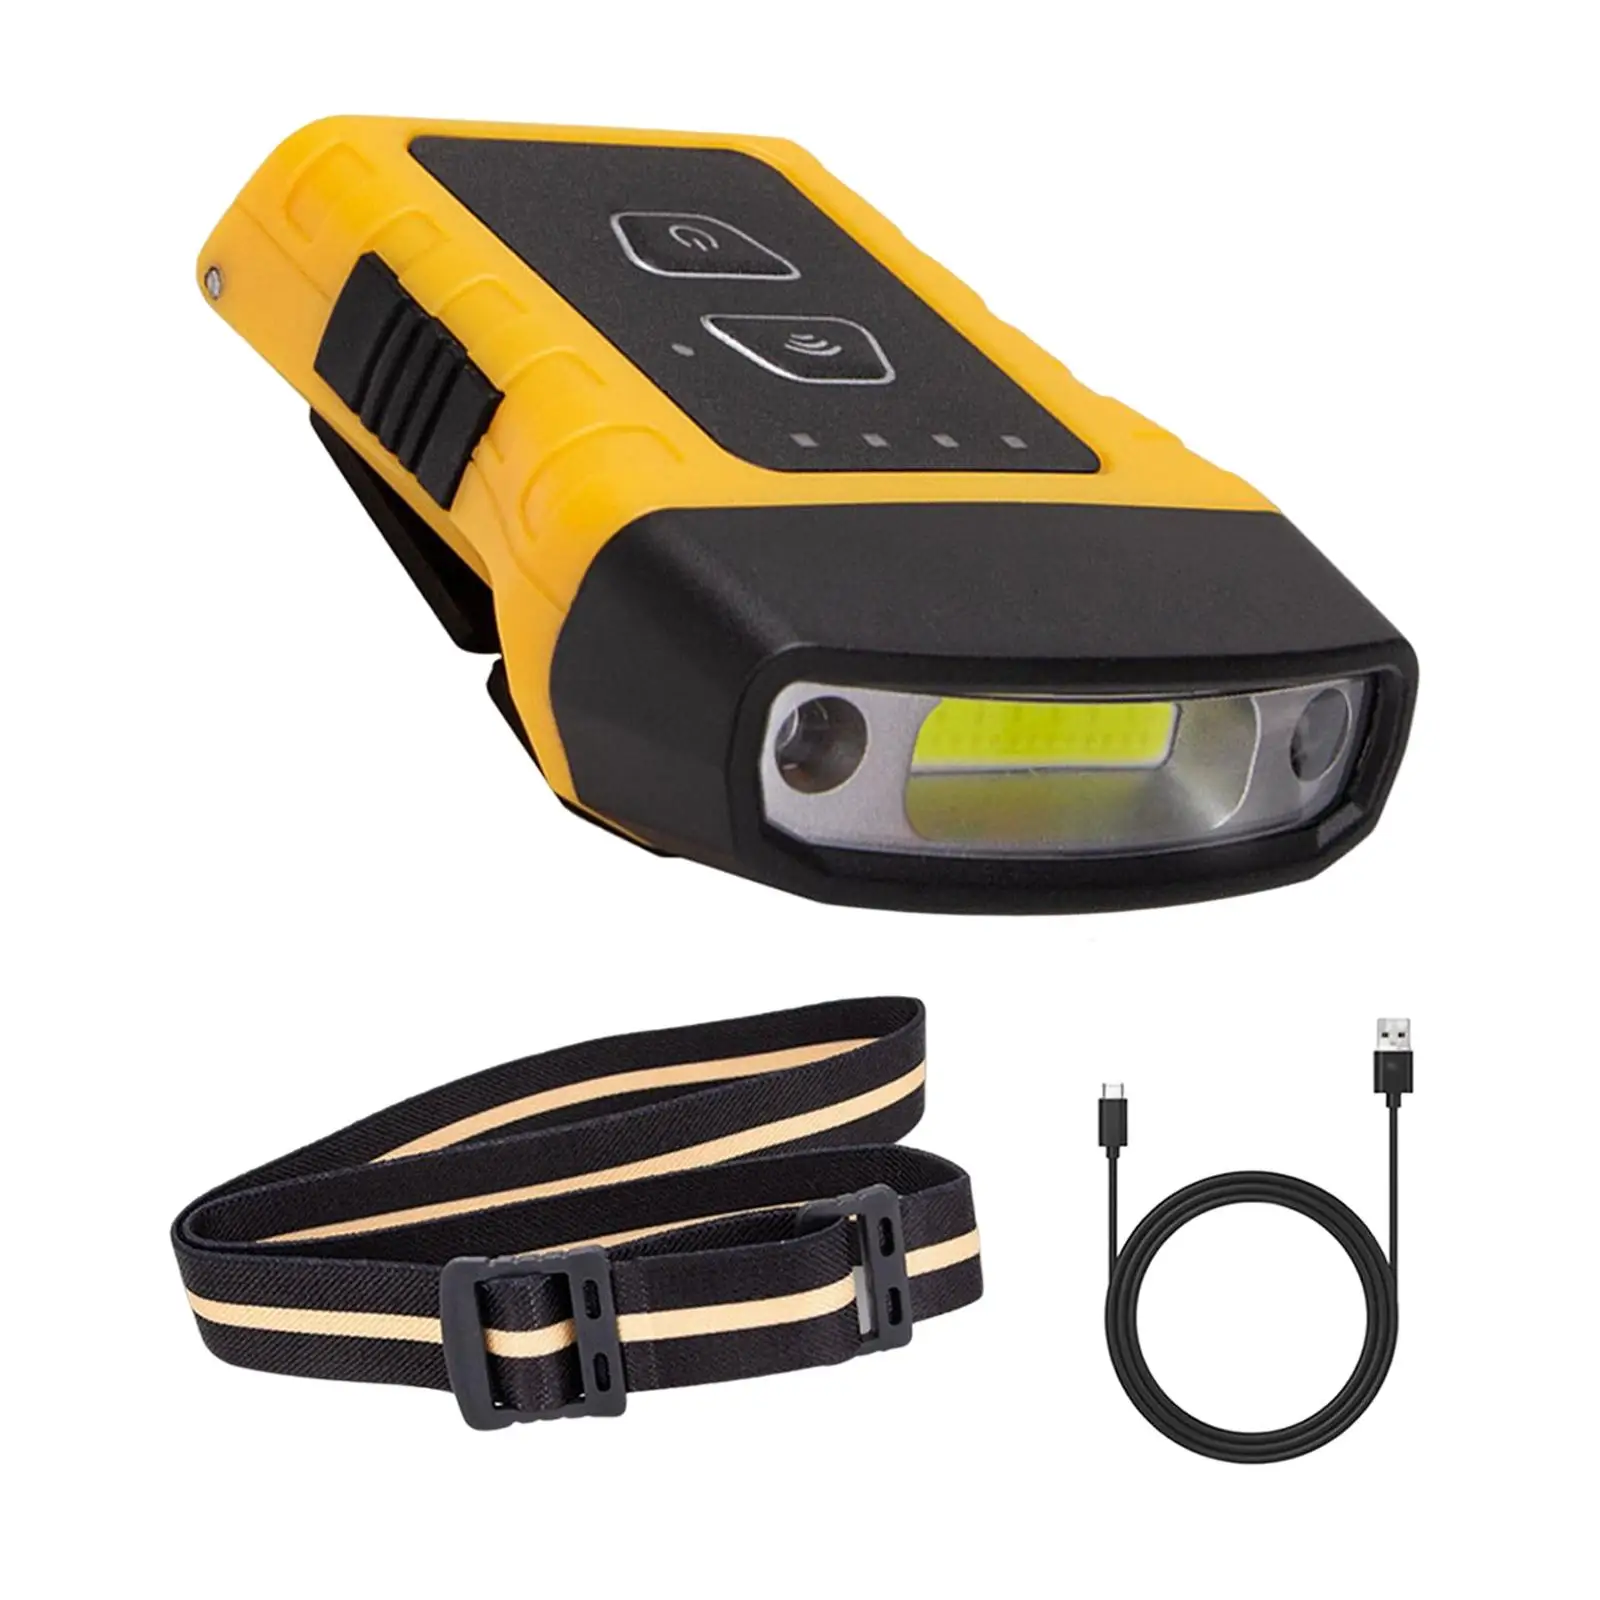 2 in 1 COB Headlamp Headlight Rechargeable 180 Adjustable Waterproof Clip On Work Light for Running Camping Climbing